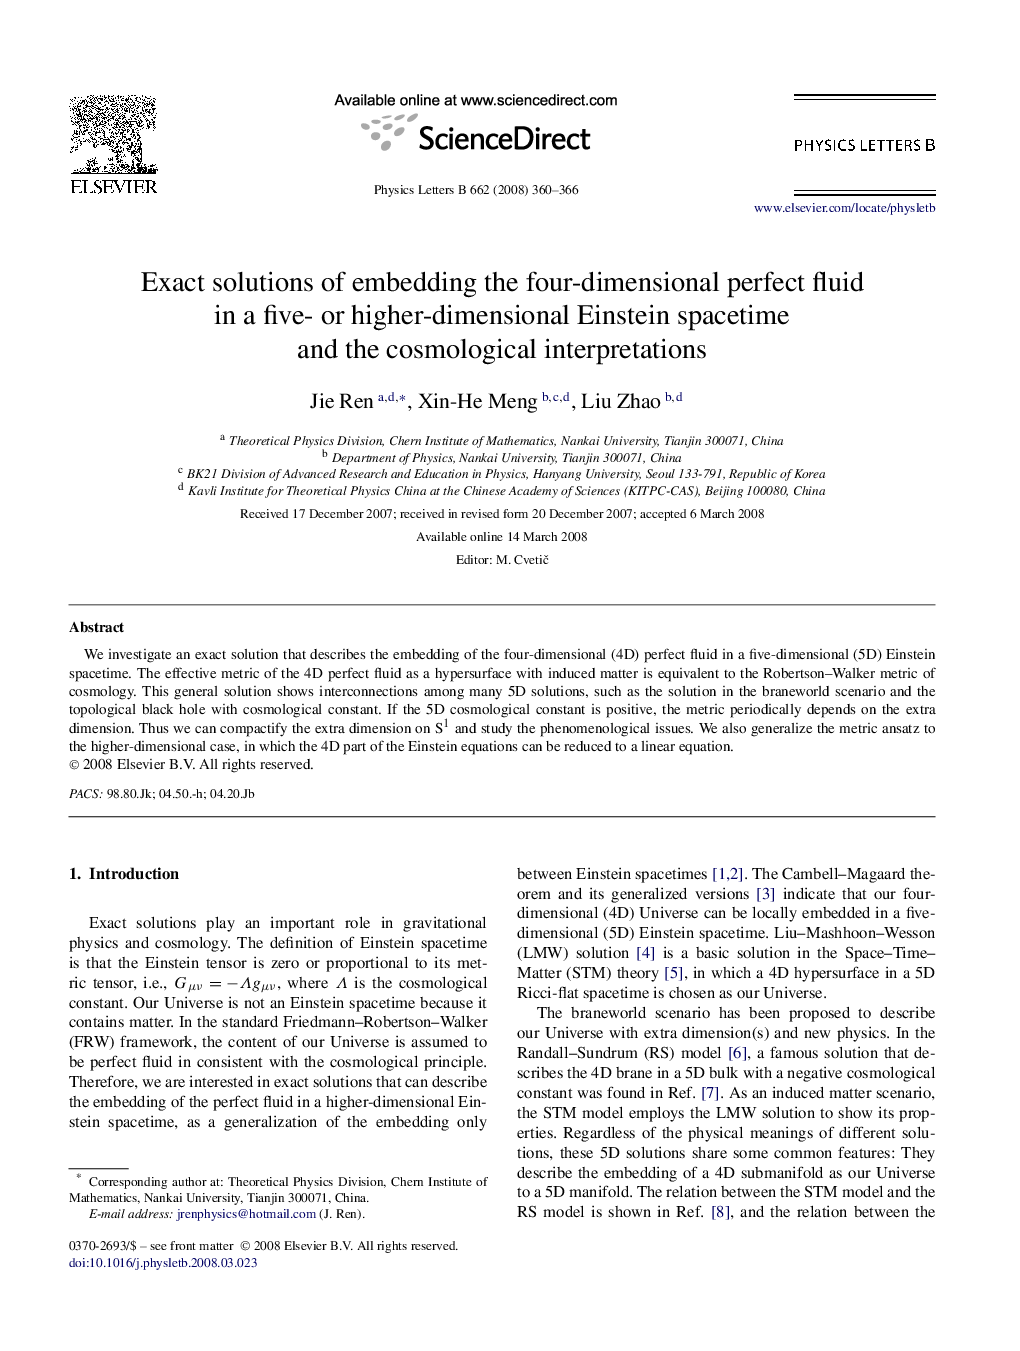 Exact solutions of embedding the four-dimensional perfect fluid in a five- or higher-dimensional Einstein spacetime and the cosmological interpretations